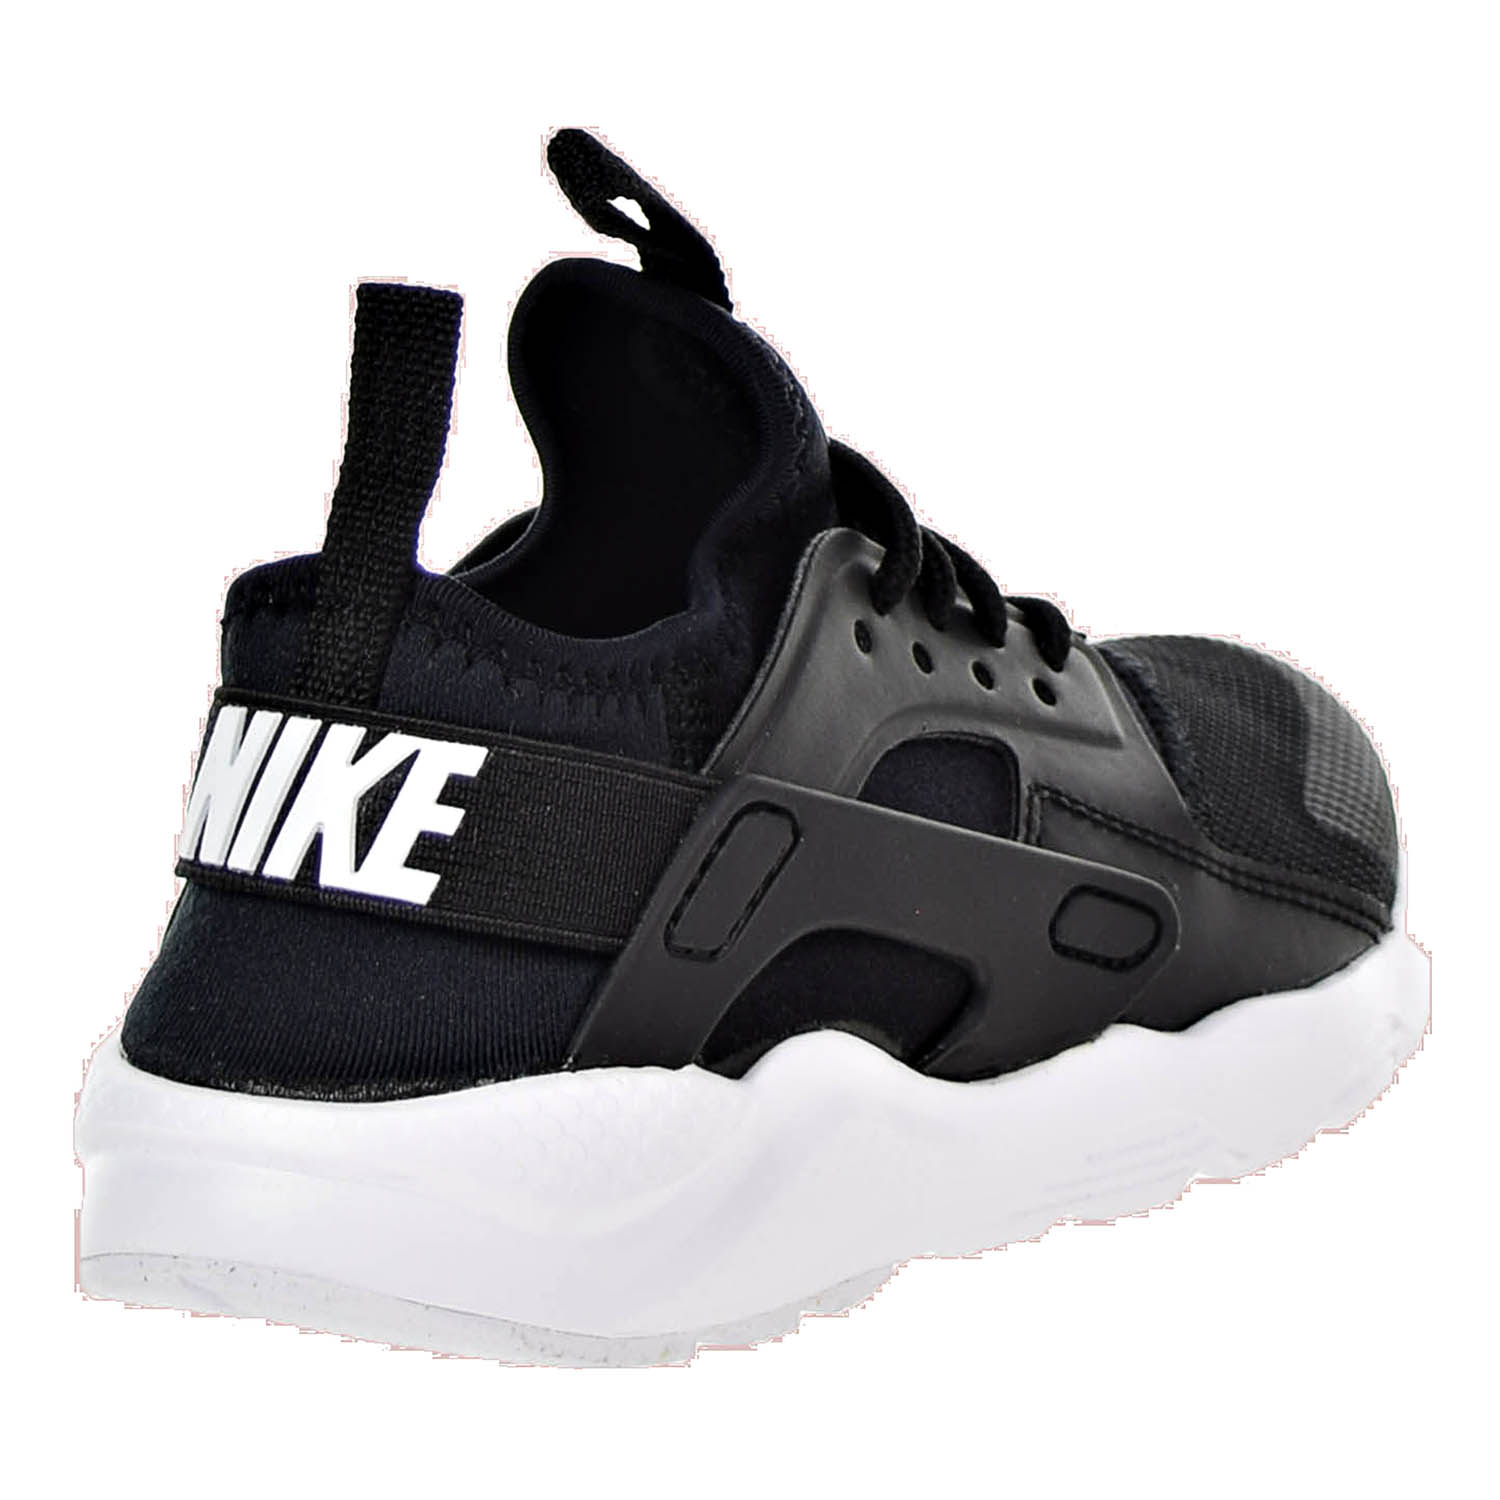 black and white toddler huaraches